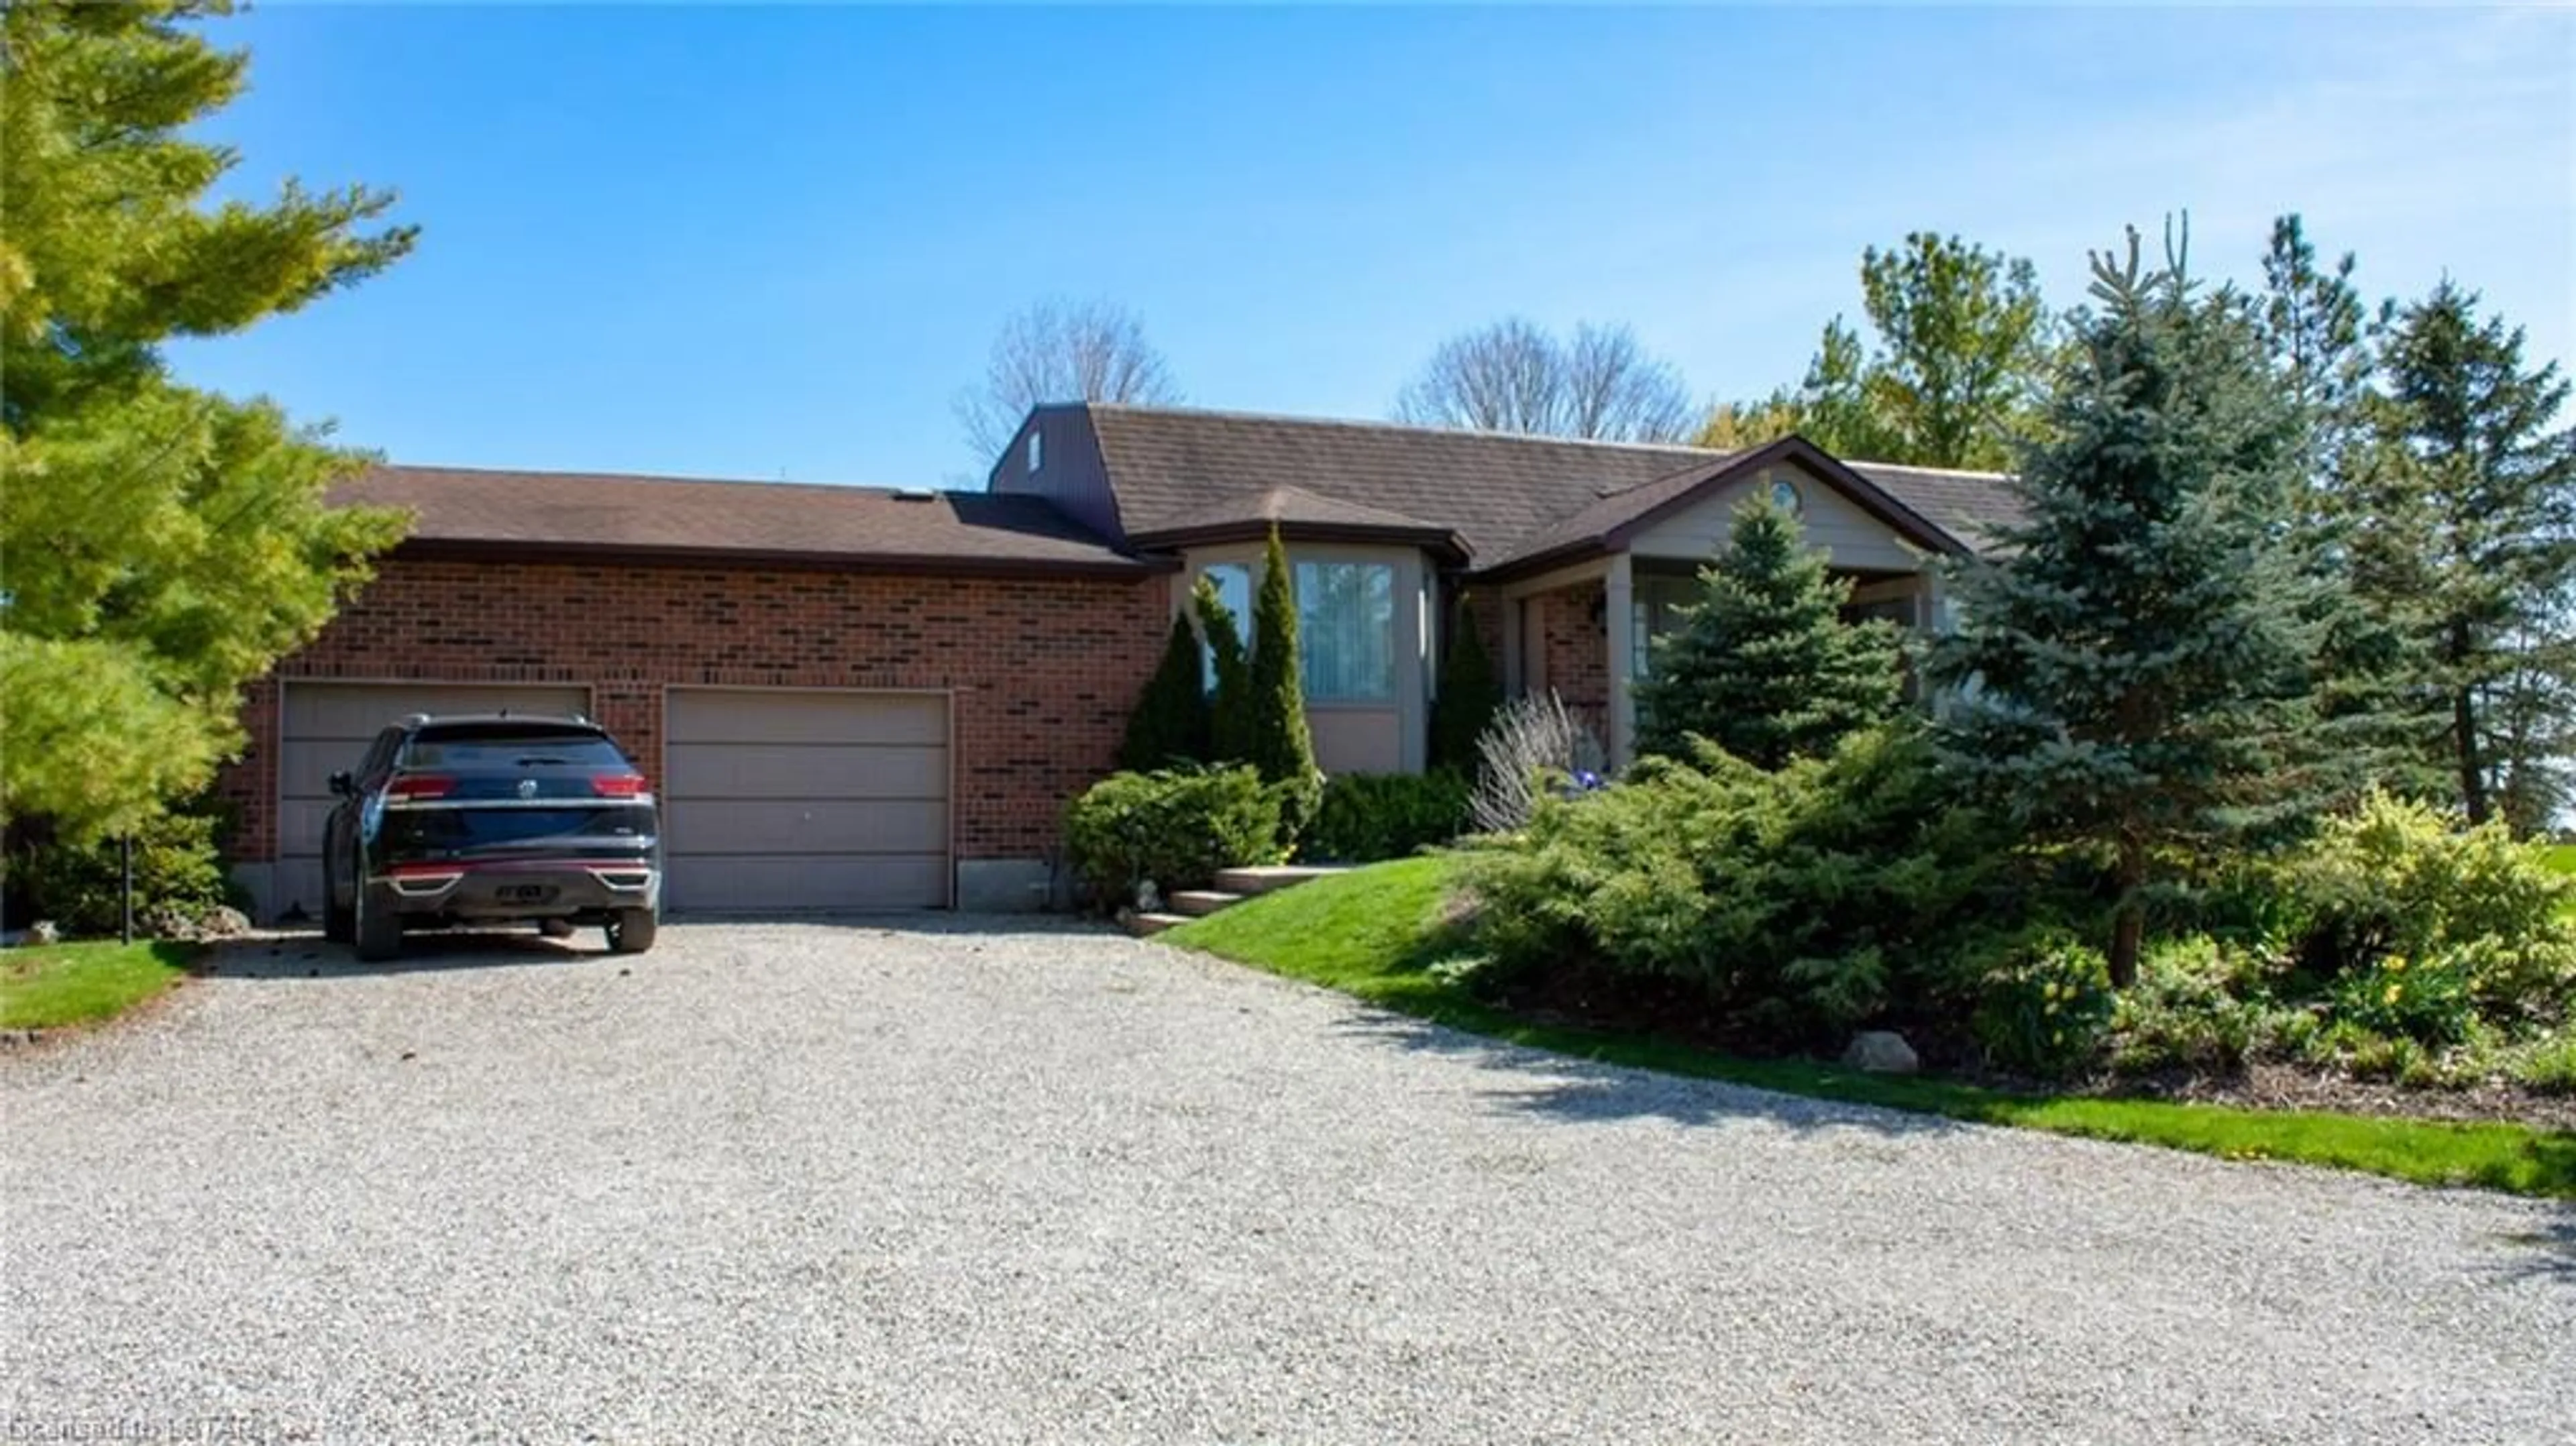 Home with brick exterior material for 431 Avon Dr, Belmont Ontario N0L 1B0